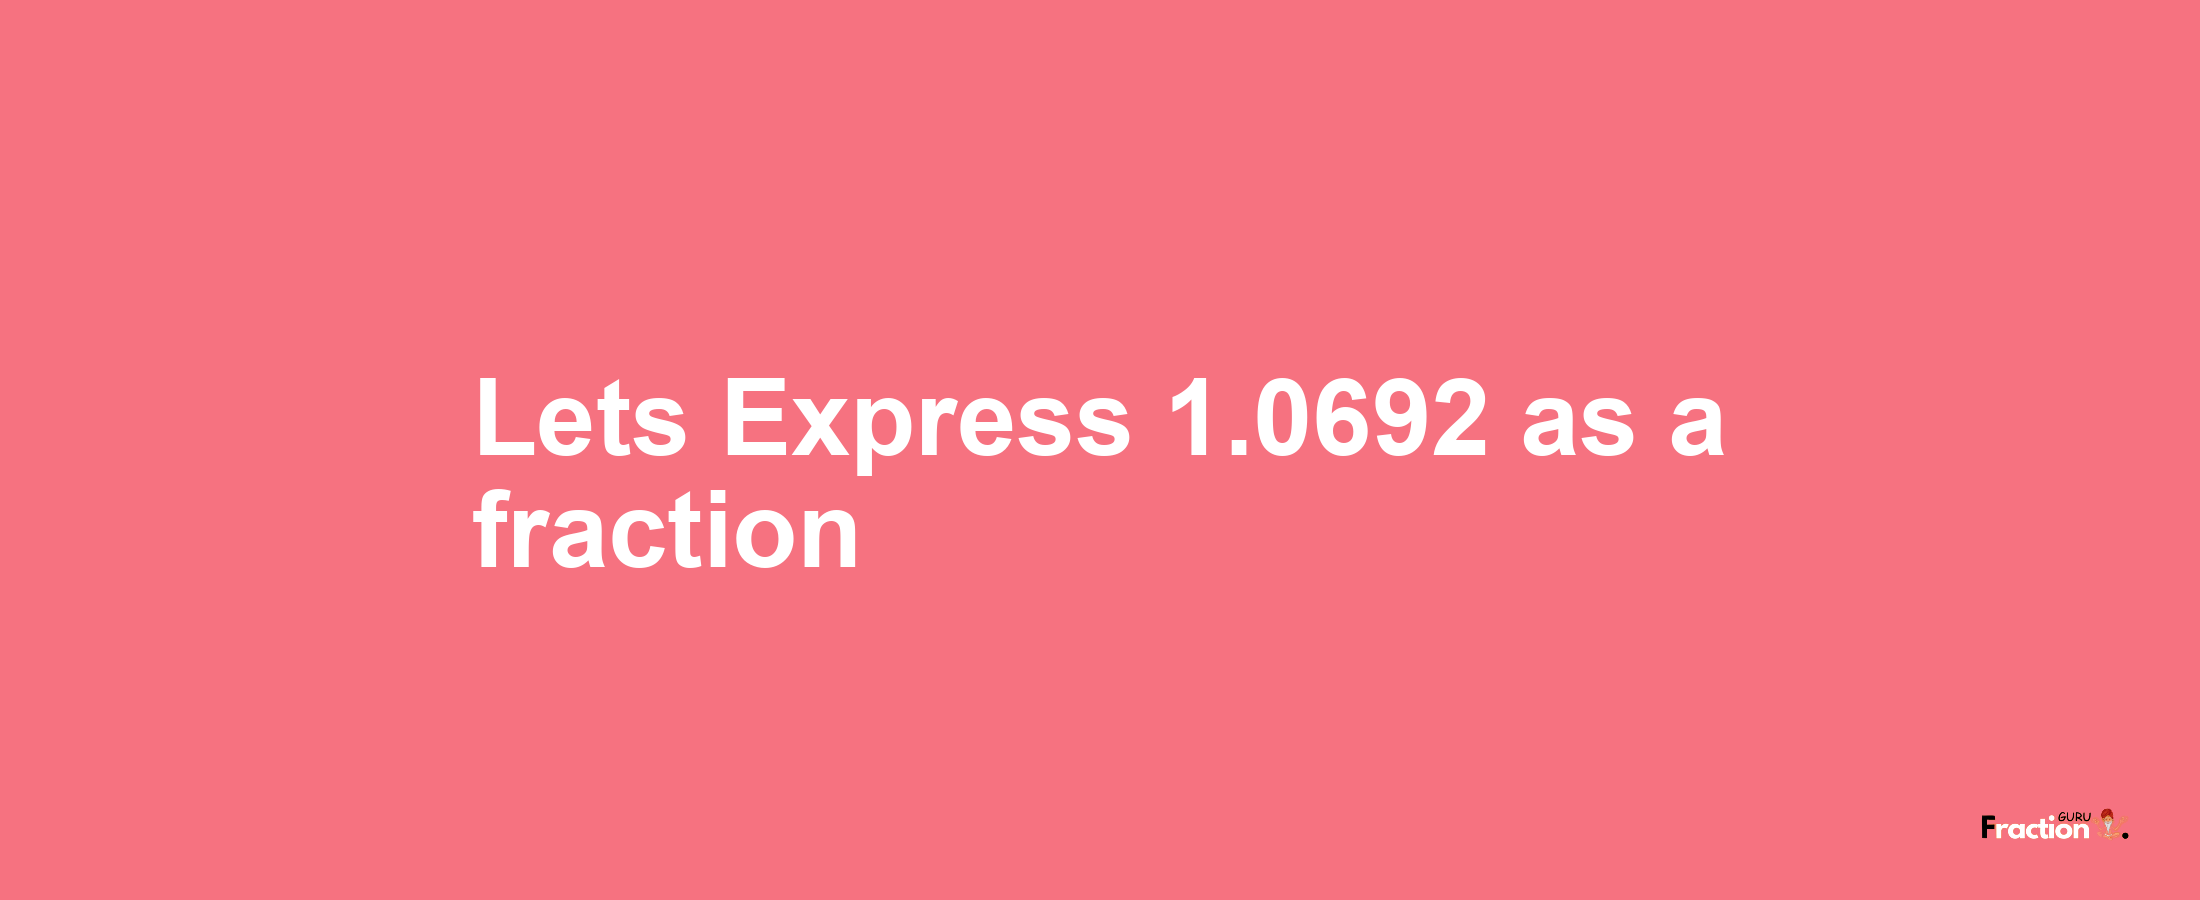 Lets Express 1.0692 as afraction